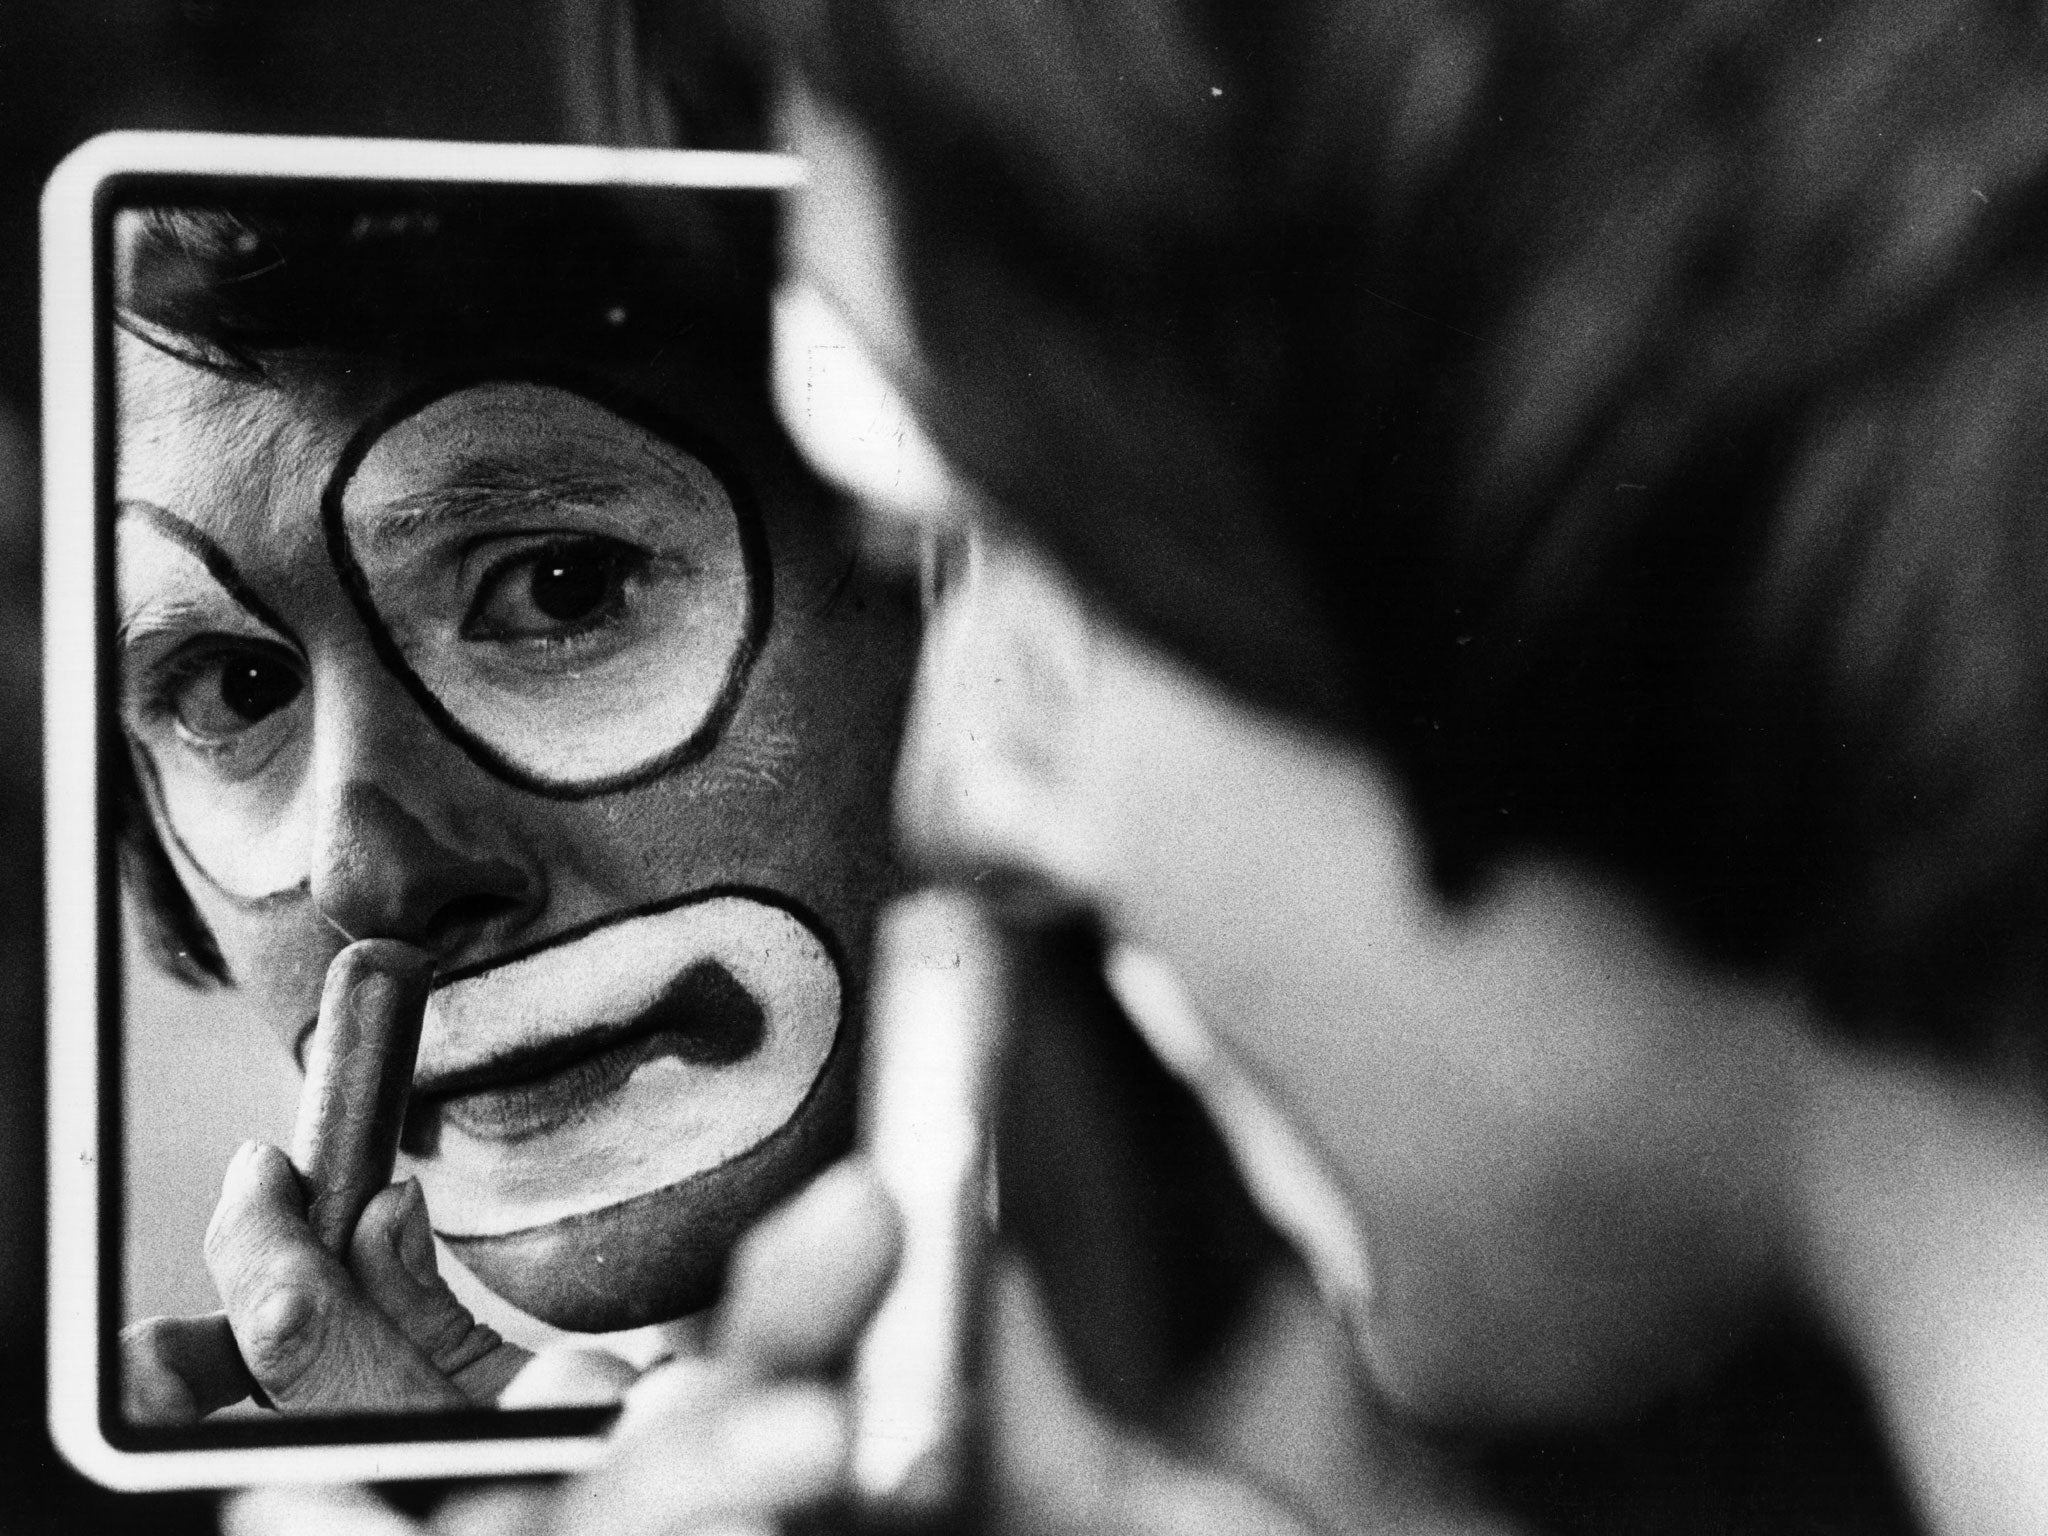 3rd October 1979: David Oliver Craik puts on the clown make up of his new persona 'Mr Bosco'.